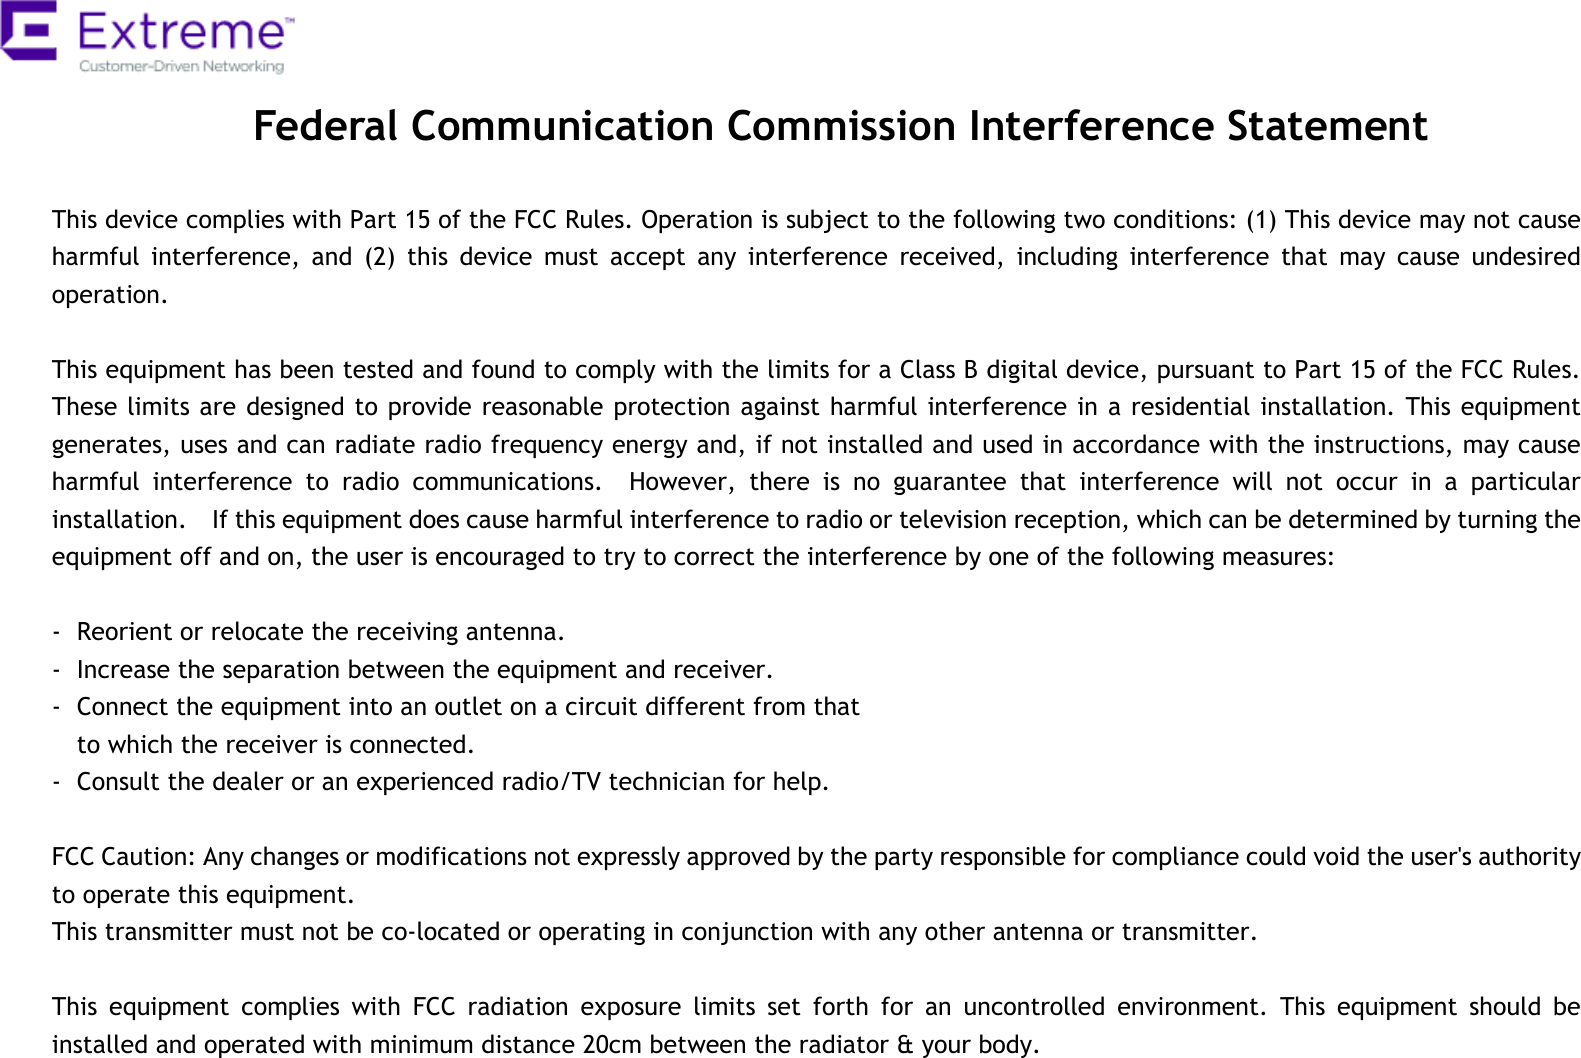  Federal Communication Commission Interference Statement  This device complies with Part 15 of the FCC Rules. Operation is subject to the following two conditions: (1) This device may not cause harmful  interference,  and  (2)  this  device  must  accept  any  interference  received,  including  interference  that  may  cause  undesired operation.  This equipment has been tested and found to comply with the limits for a Class B digital device, pursuant to Part 15 of the FCC Rules.   These limits are designed to provide reasonable protection against harmful interference in a residential installation. This equipment generates, uses and can radiate radio frequency energy and, if not installed and used in accordance with the instructions, may cause harmful  interference  to  radio  communications.    However,  there  is  no  guarantee  that  interference  will  not  occur  in  a  particular installation.    If this equipment does cause harmful interference to radio or television reception, which can be determined by turning the equipment off and on, the user is encouraged to try to correct the interference by one of the following measures:  -  Reorient or relocate the receiving antenna. -  Increase the separation between the equipment and receiver. -  Connect the equipment into an outlet on a circuit different from that to which the receiver is connected. -  Consult the dealer or an experienced radio/TV technician for help.  FCC Caution: Any changes or modifications not expressly approved by the party responsible for compliance could void the user&apos;s authority to operate this equipment. This transmitter must not be co-located or operating in conjunction with any other antenna or transmitter.    This  equipment  complies  with  FCC  radiation  exposure  limits  set  forth  for  an  uncontrolled  environment.  This  equipment  should  be installed and operated with minimum distance 20cm between the radiator &amp; your body. 